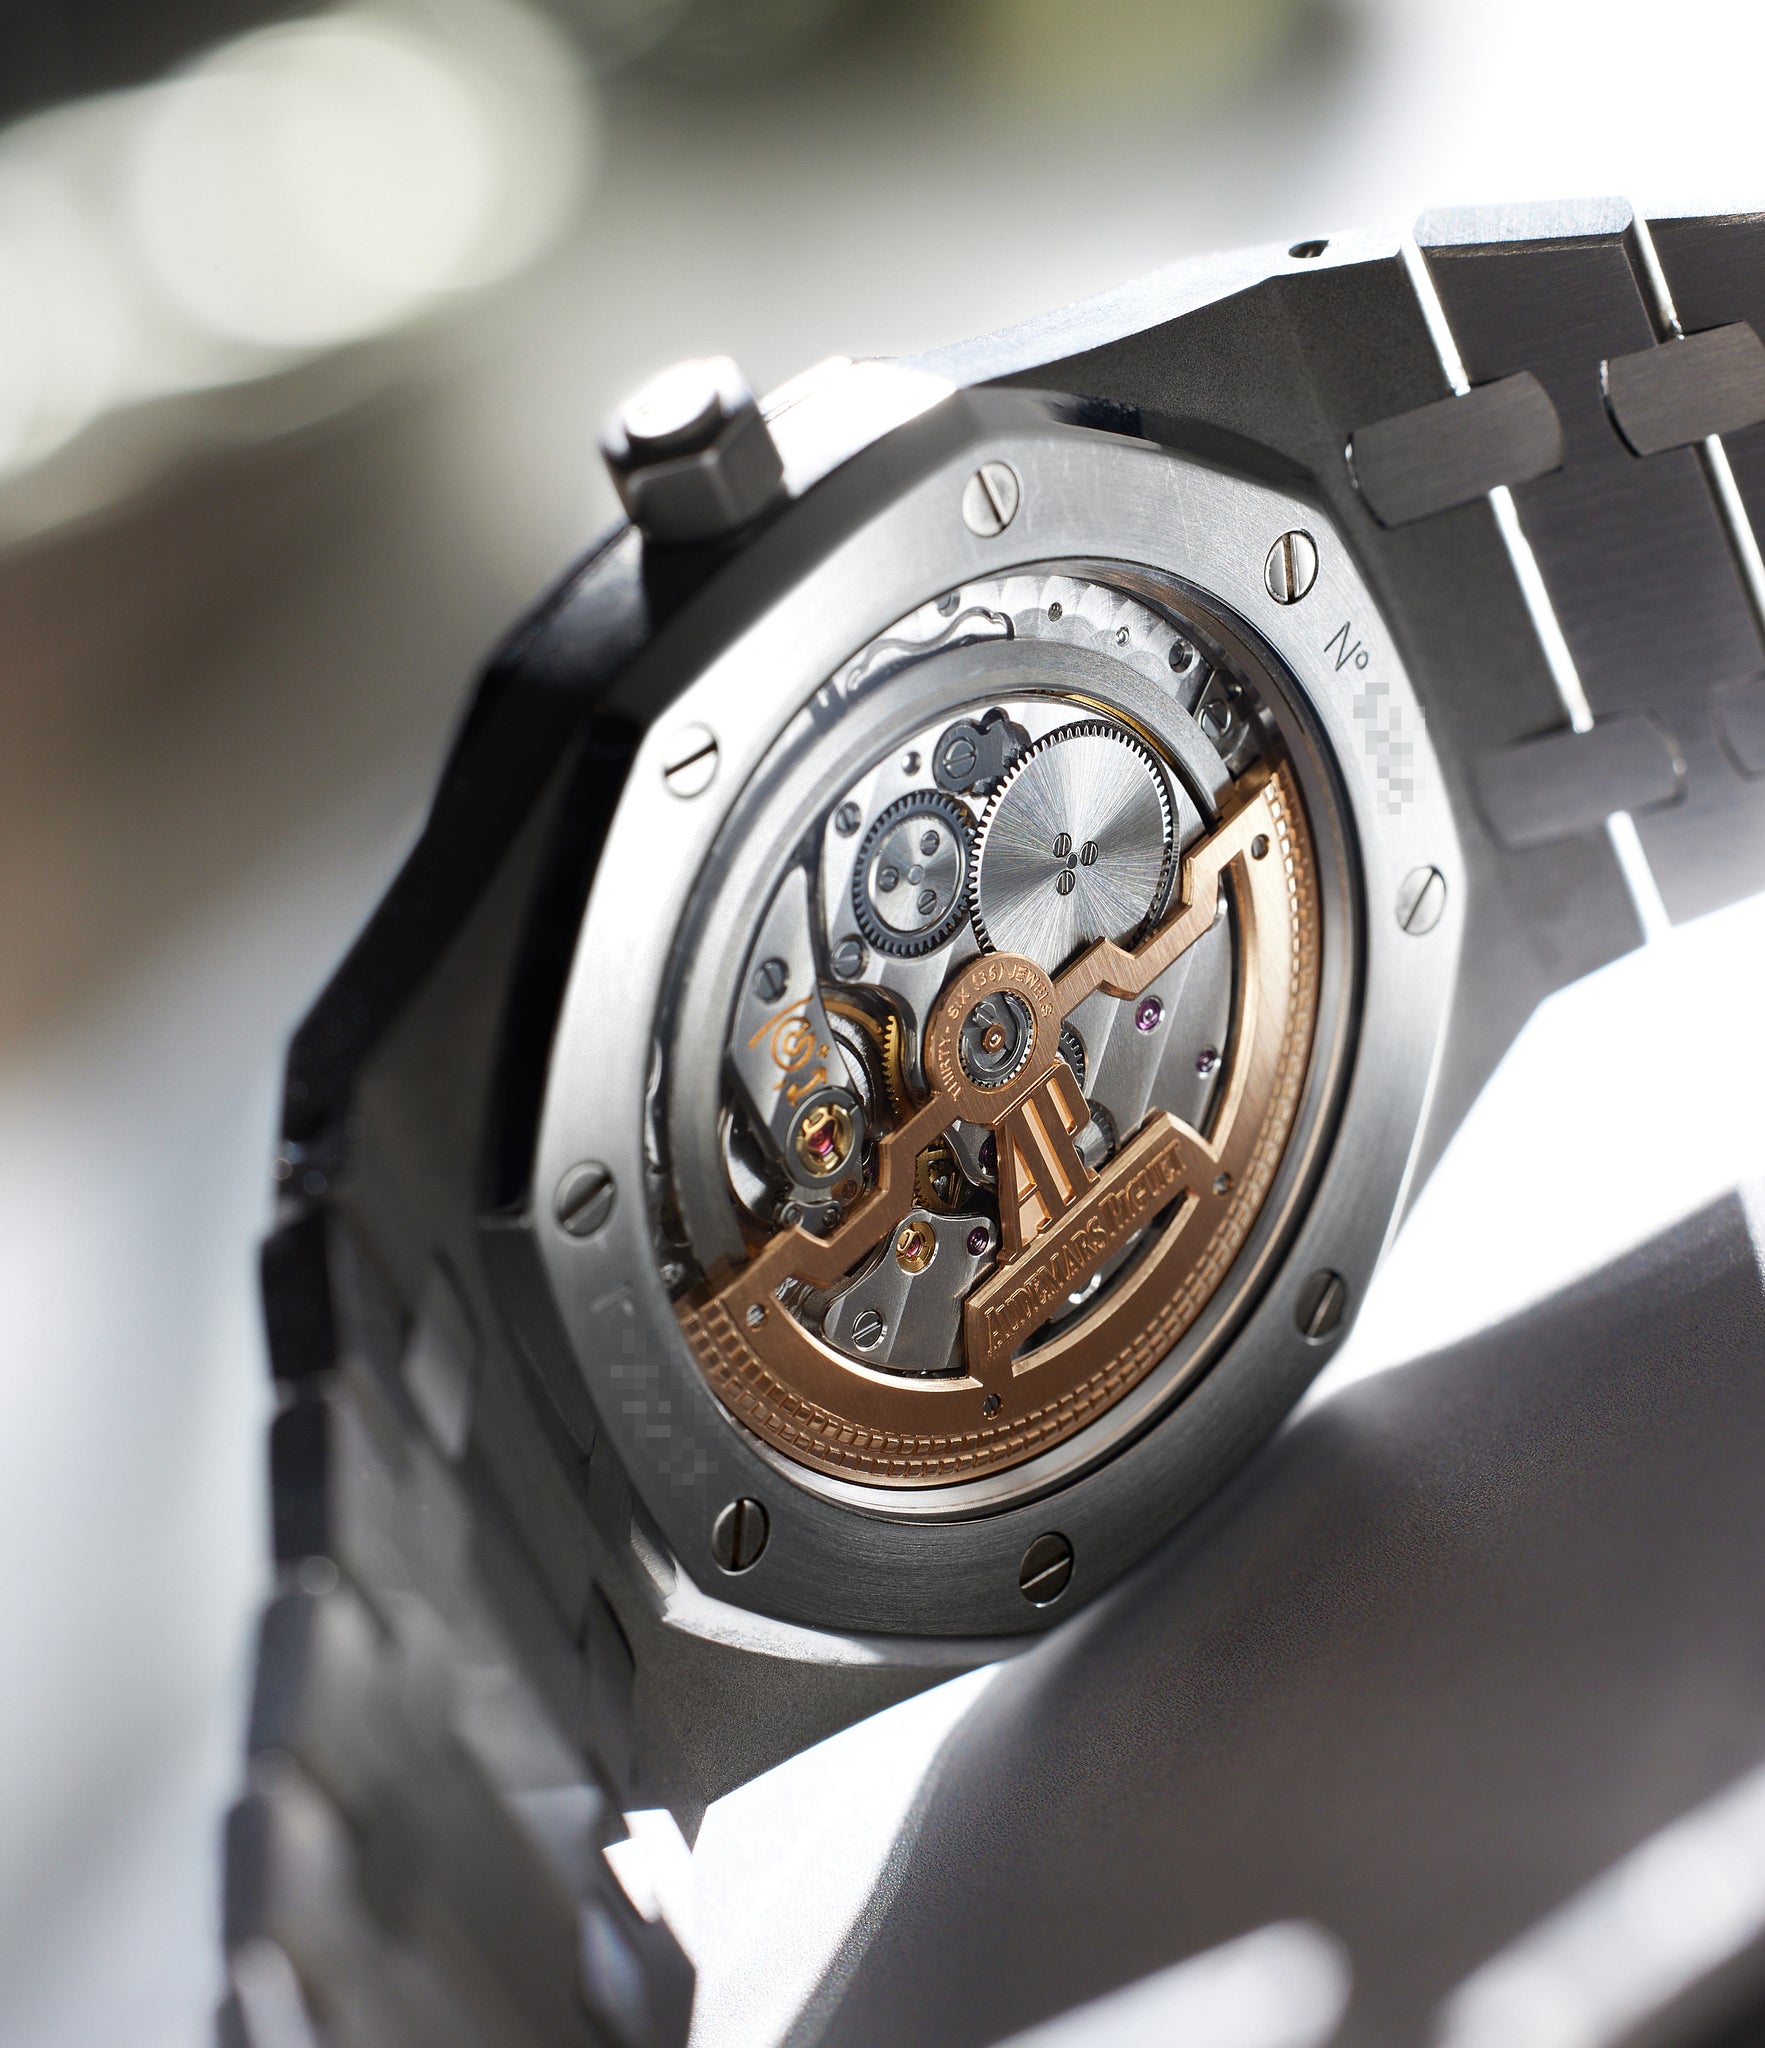 caseback Audemars Piguet Royal Oak Jumbo 15202ST.00.1240ST.01 Stainless Steel preowned watch at A Collected Man London